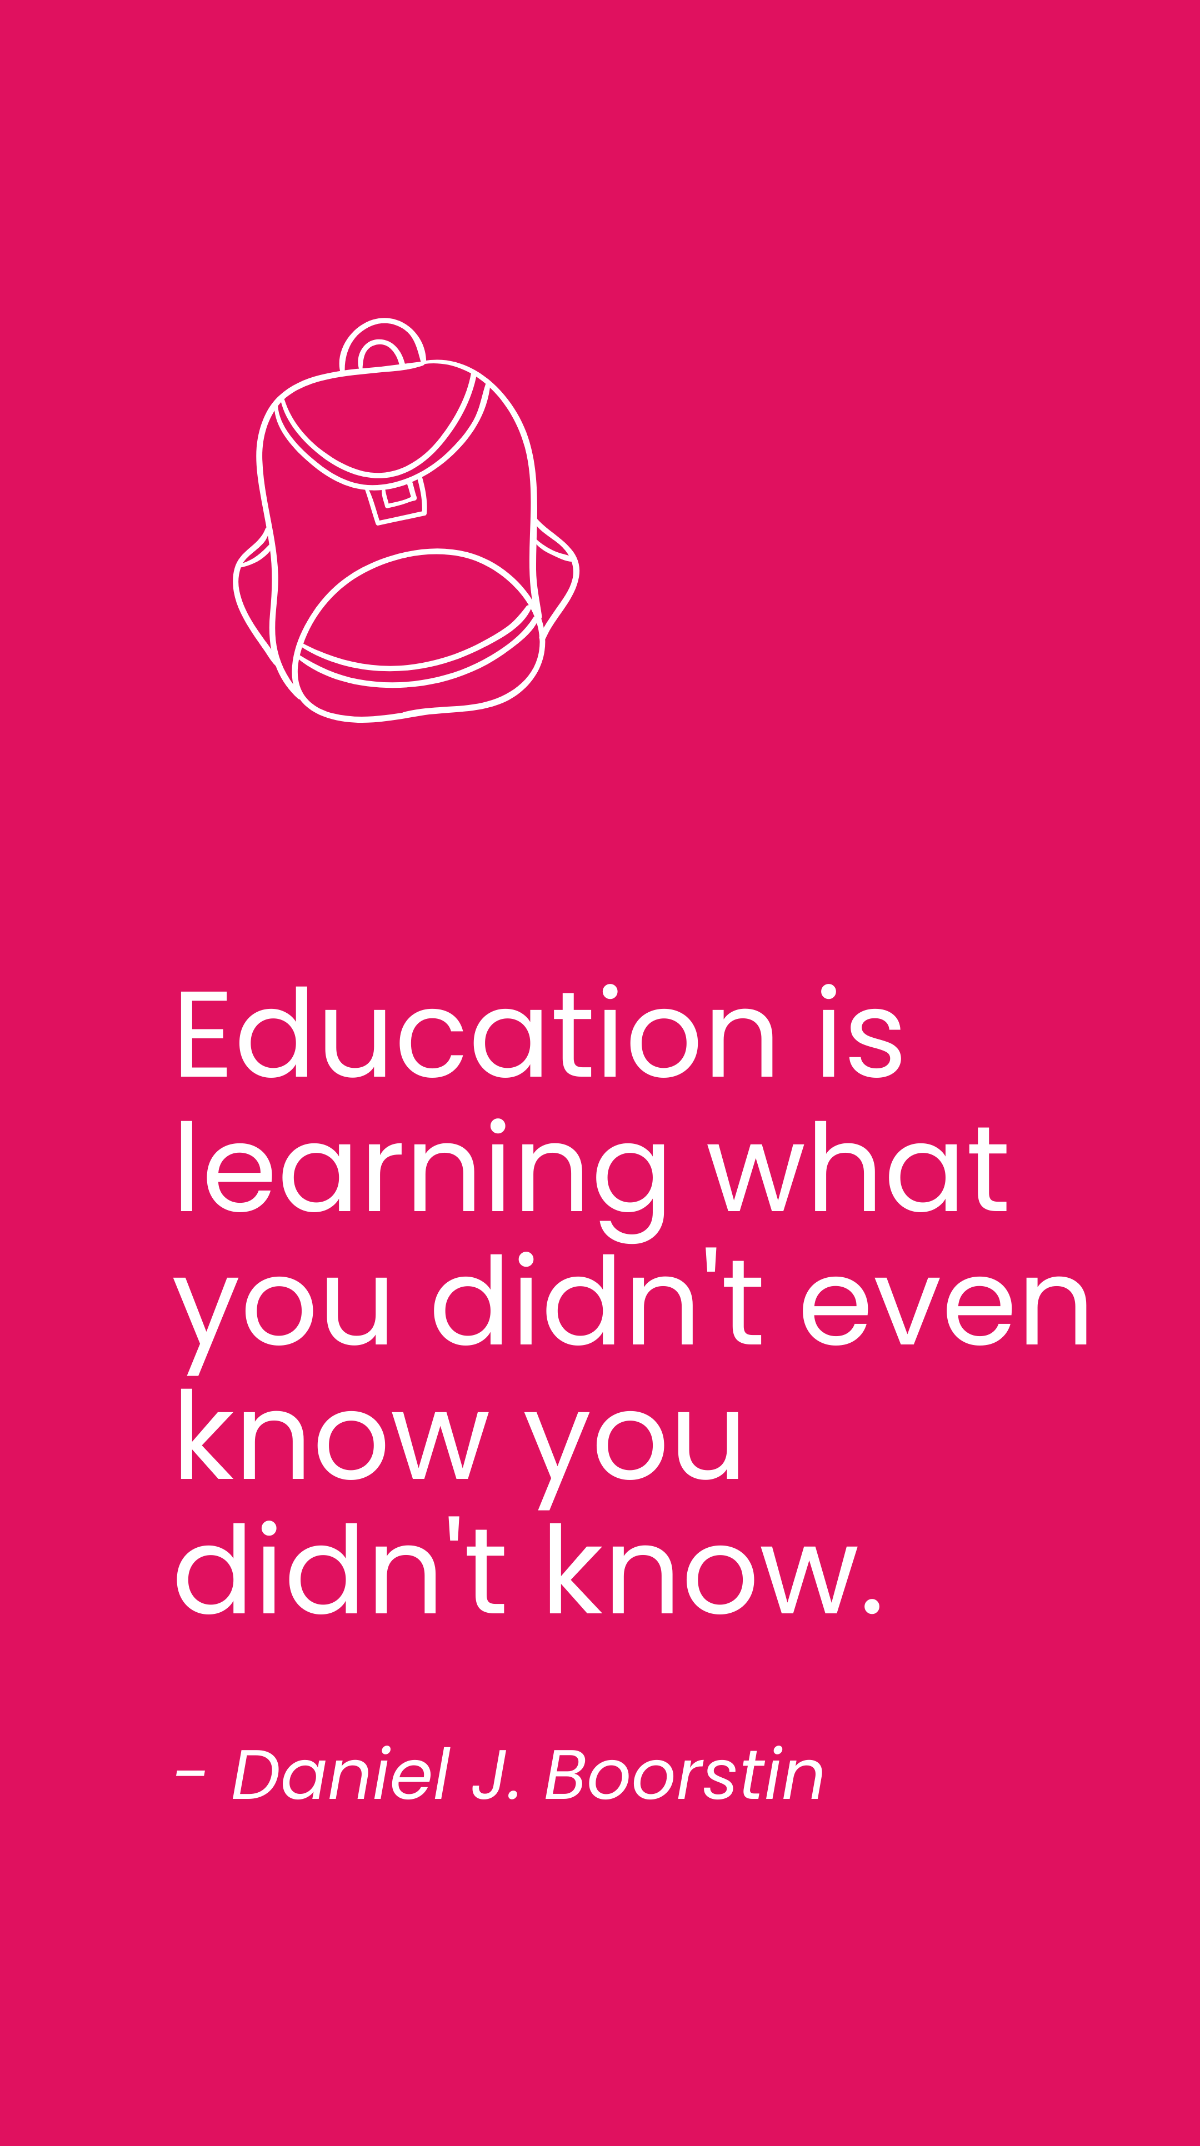 Daniel J. Boorstin - Education is learning what you didn't even know you didn't know. Template